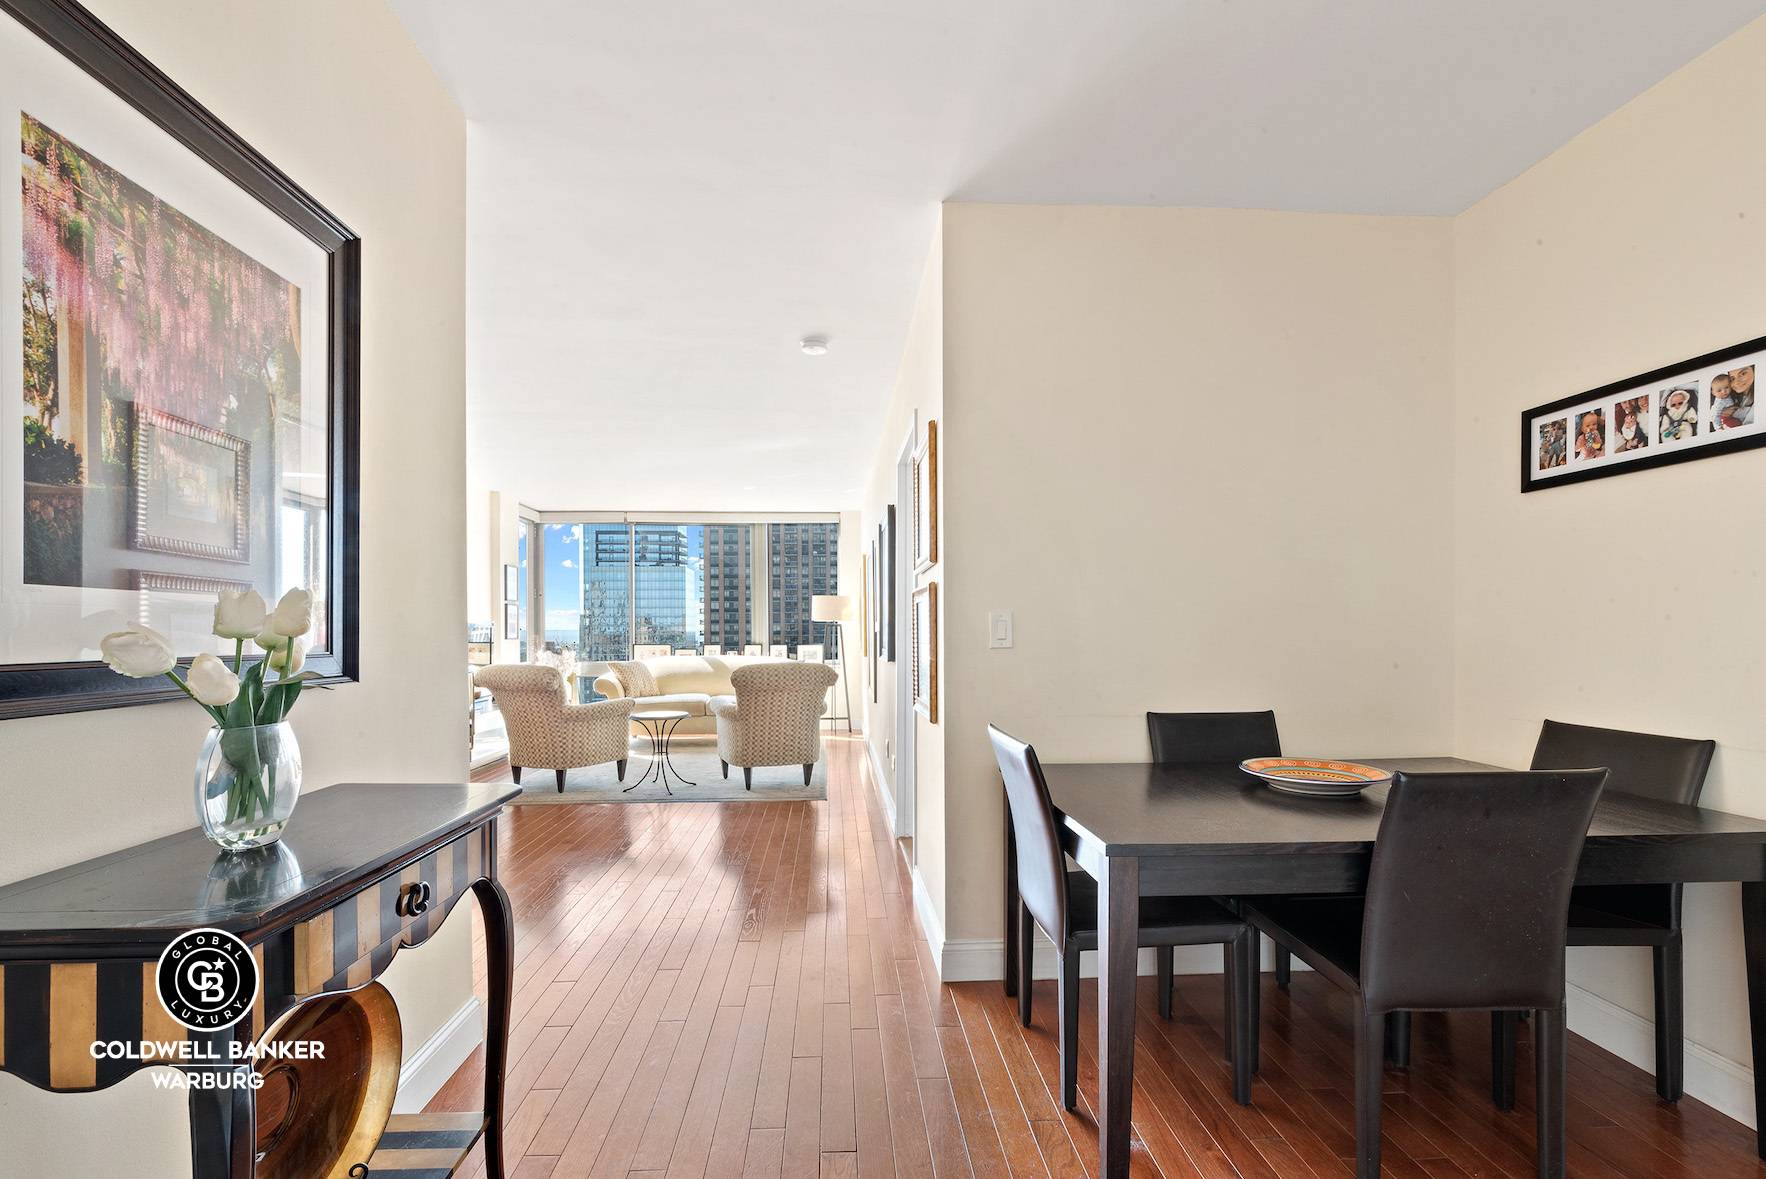 Come see the fabulous views from every window in this spacious, high floor, split two bedroom, two bathroom home in the highly coveted Park Millennium Tower in Lincoln Square.